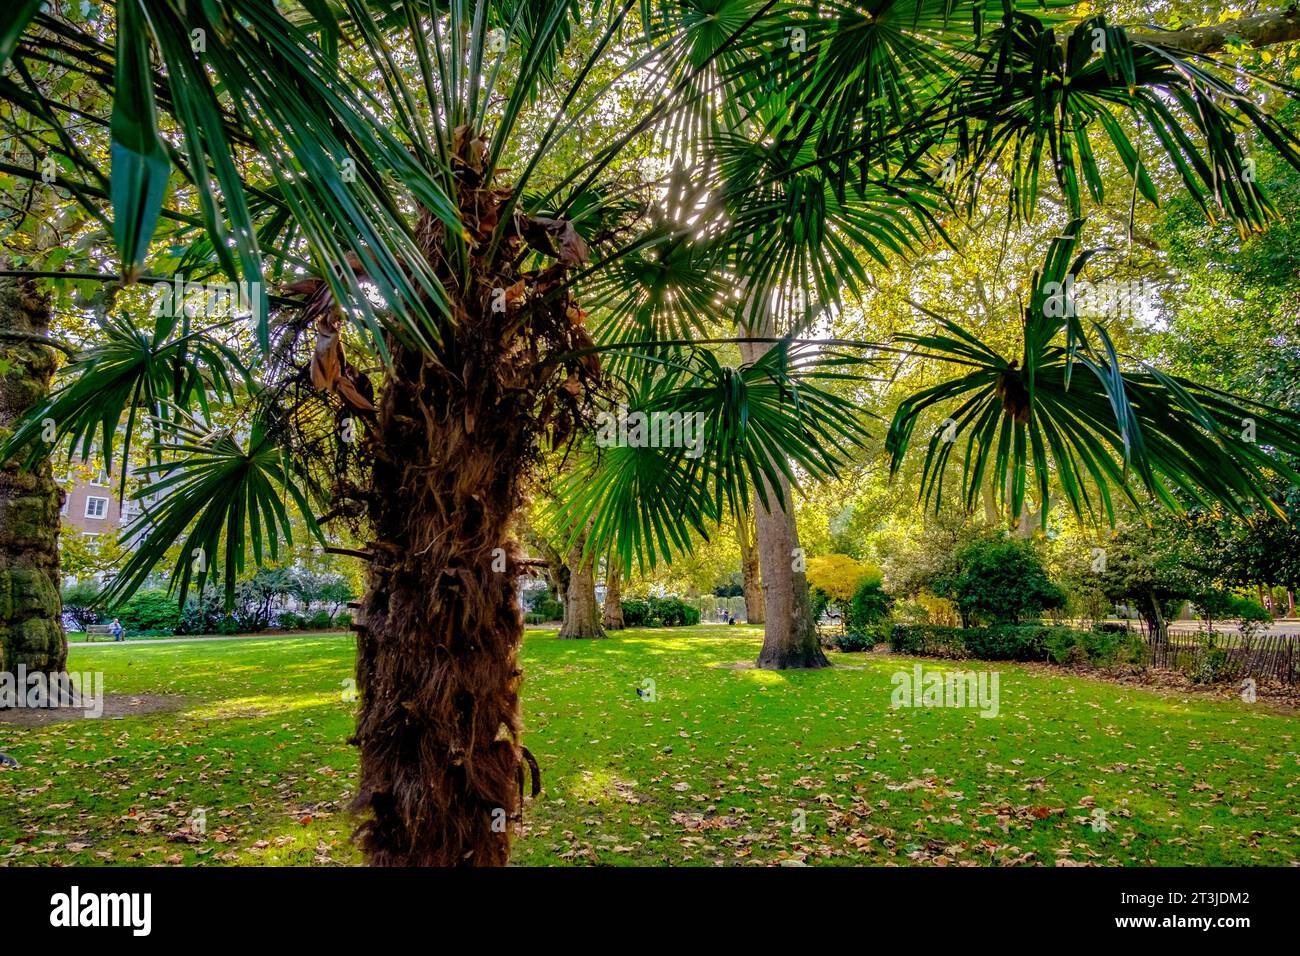 Sub-tropical plants and trees in Lincoln's Inn Fields, London, UK Stock Photo